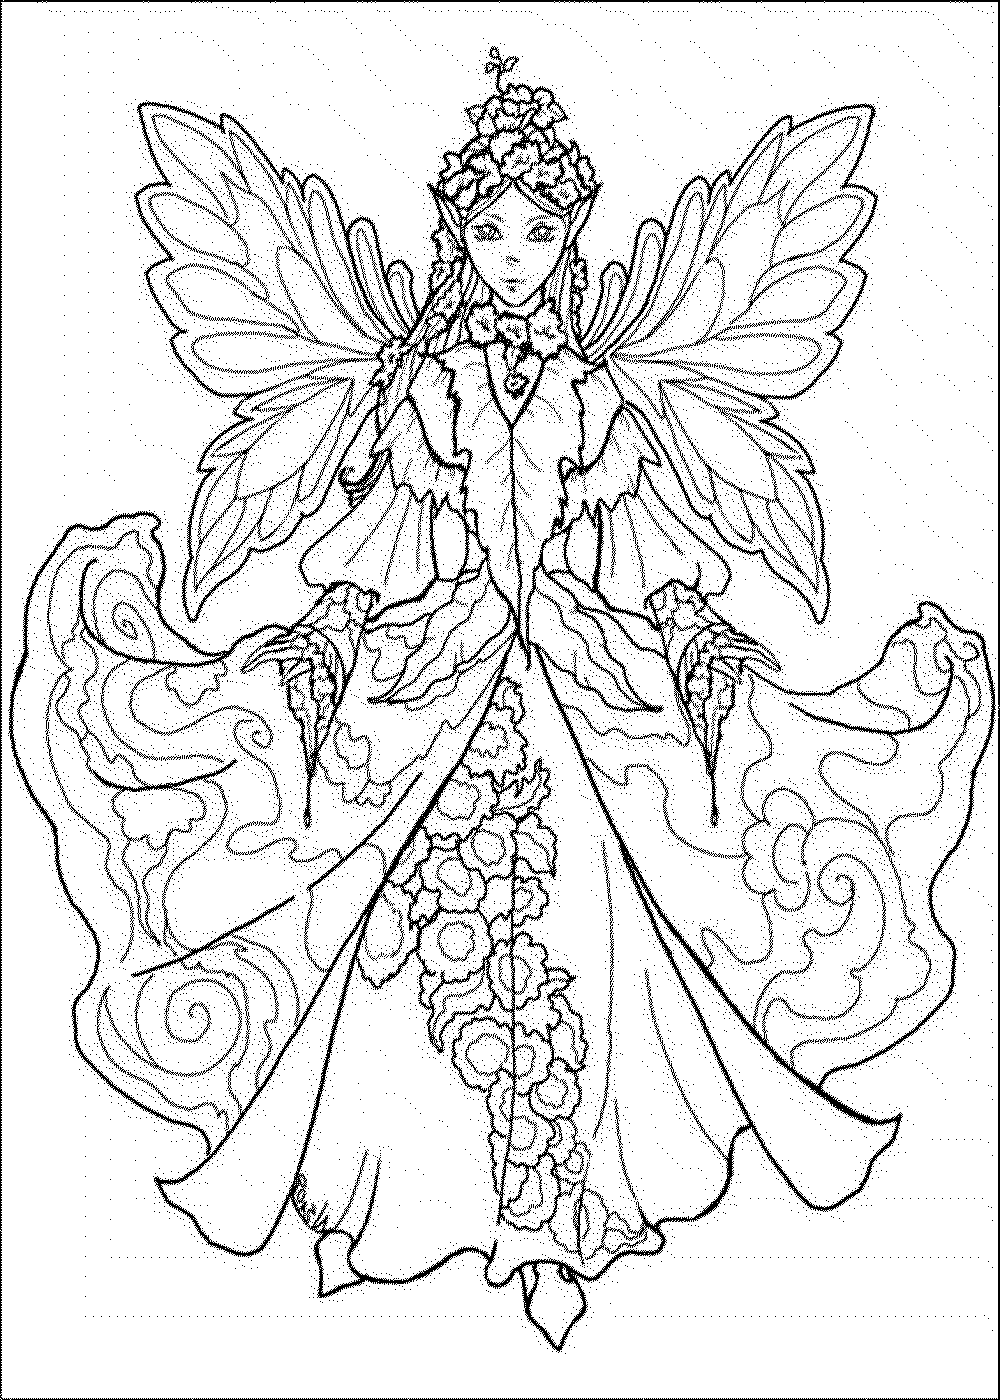 Coloring Pages Of Fairies For Adults - Coloring Home